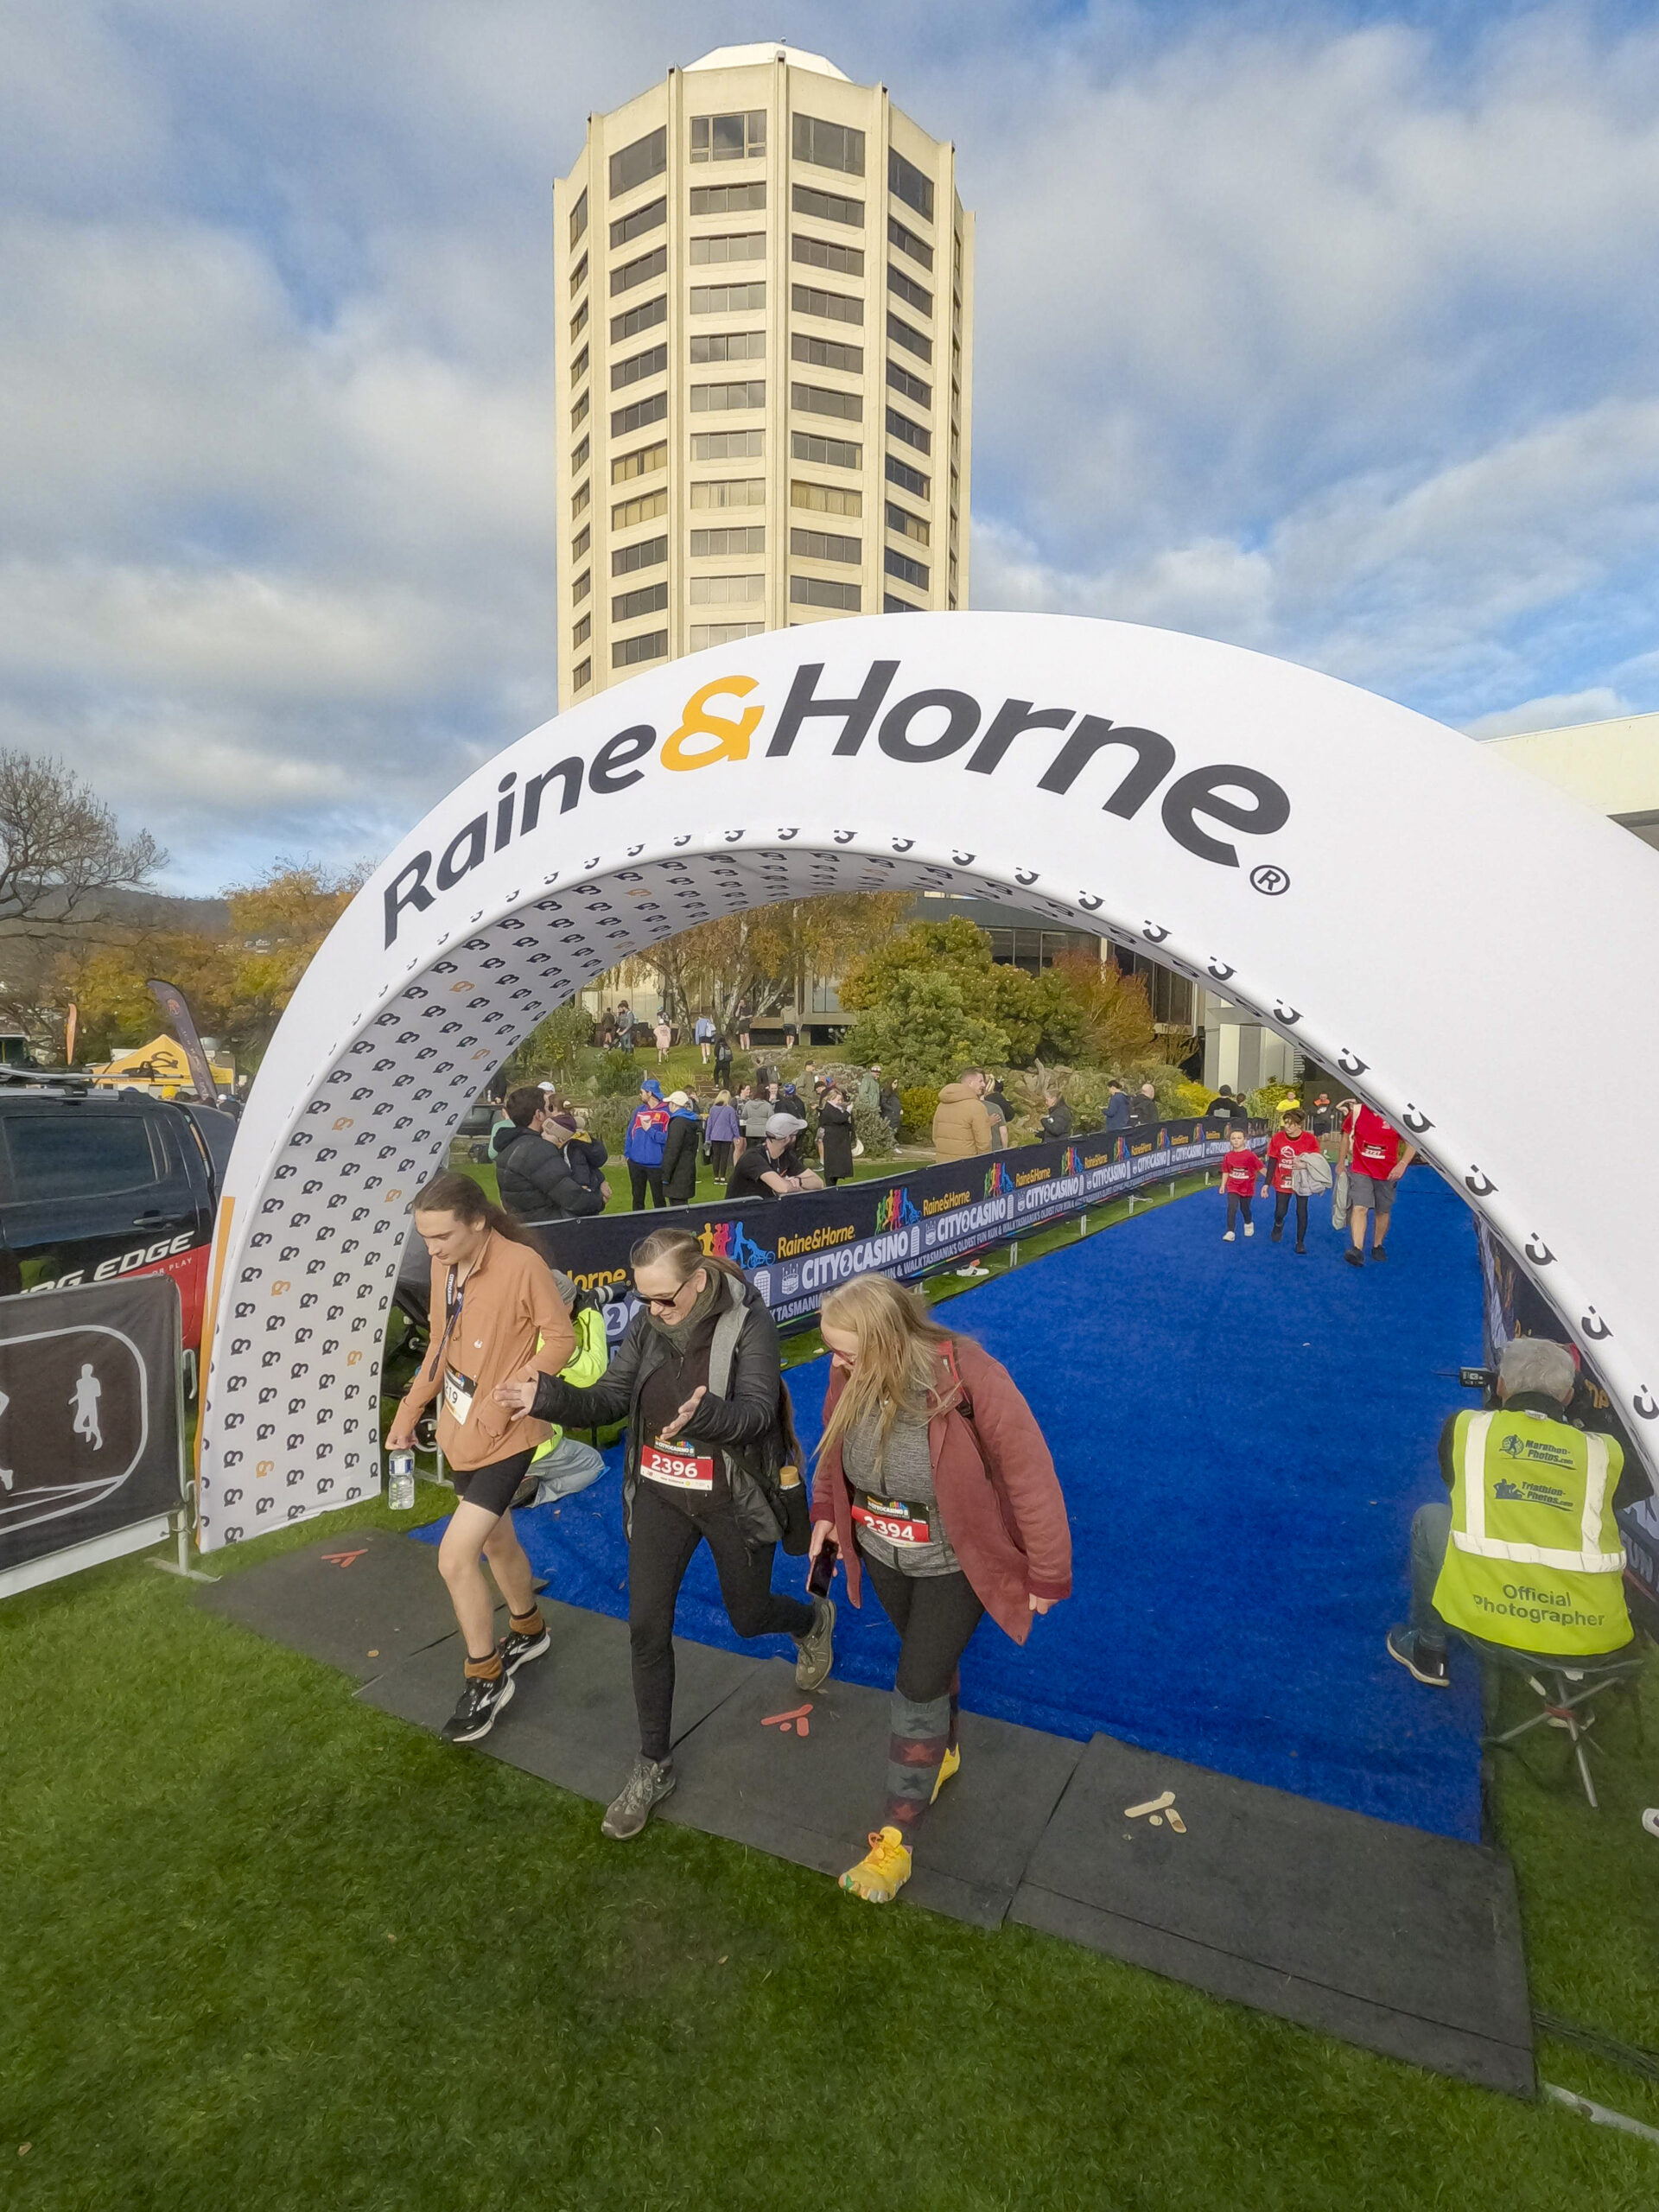 Three people crossing the finish line of a walking race under an arch bearing the words "Raine & Horne" alongside a tall tower building